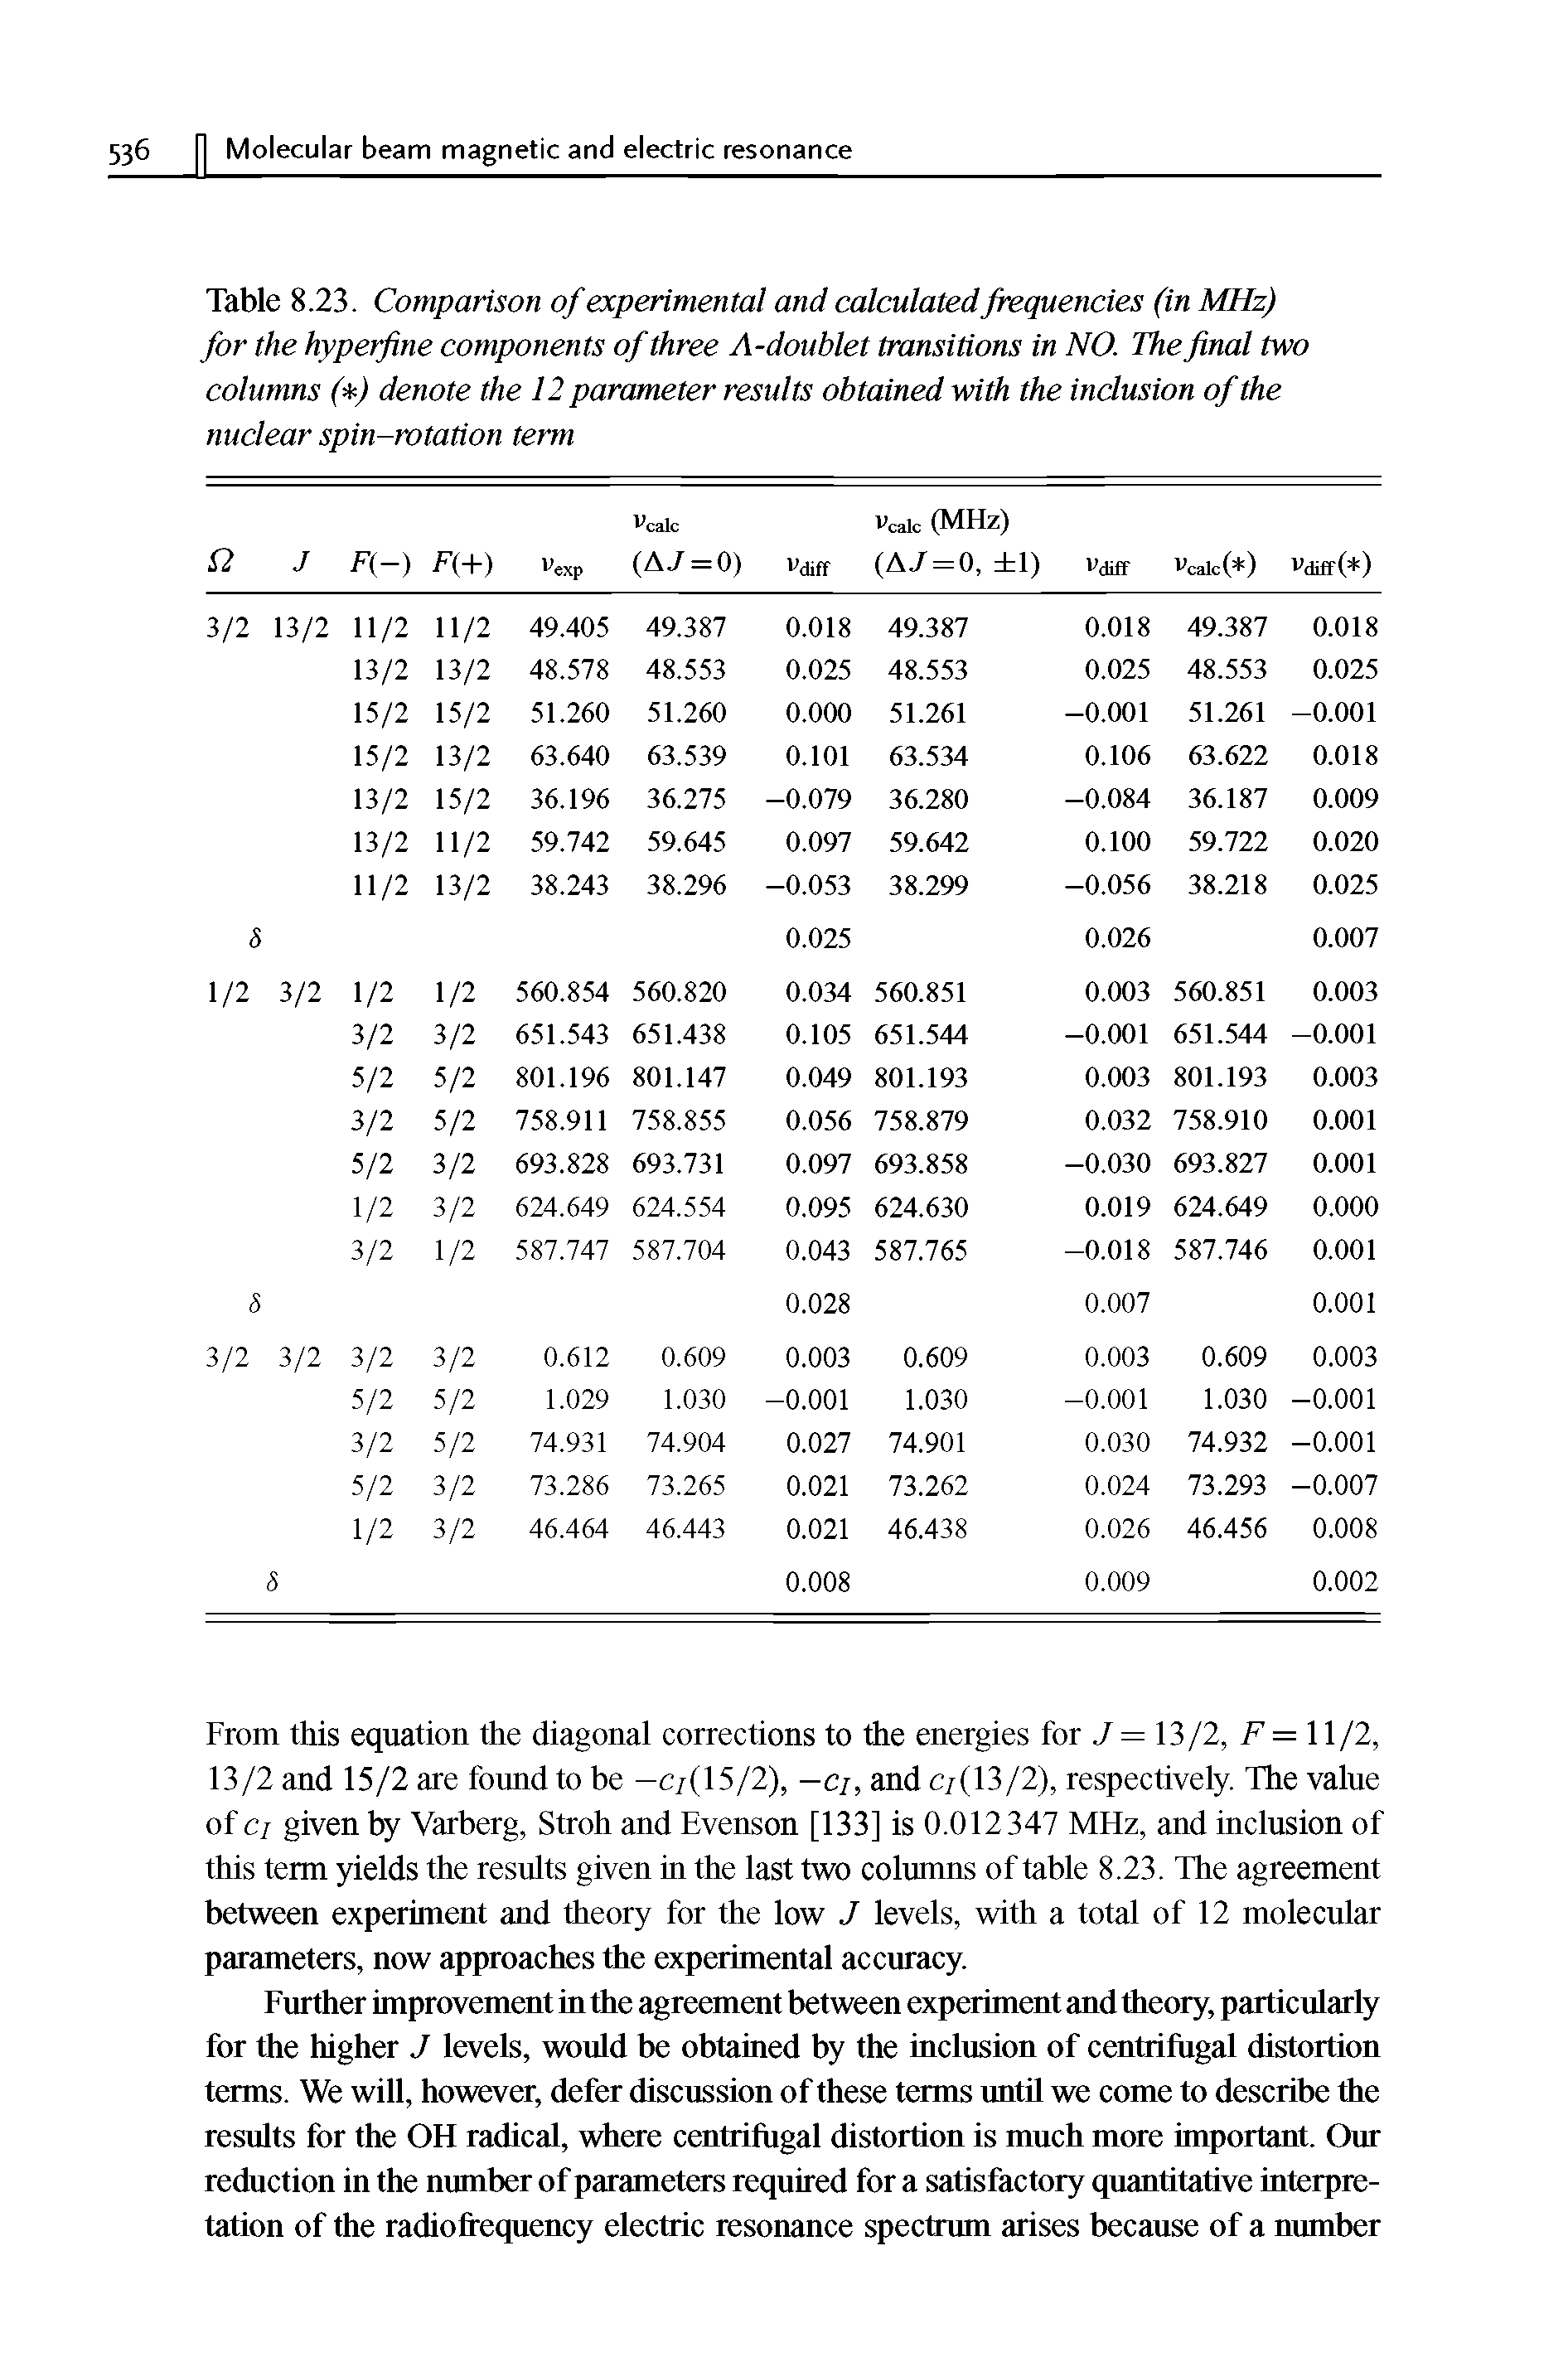 Table 8.23. Comparison of experimental and calculated frequencies (in MHz) for the hyperfine components of three A-doublet transitions in NO. The final two columns ( ) denote the 12 parameter results obtained with the inclusion of the nuclear spin-rotation term...